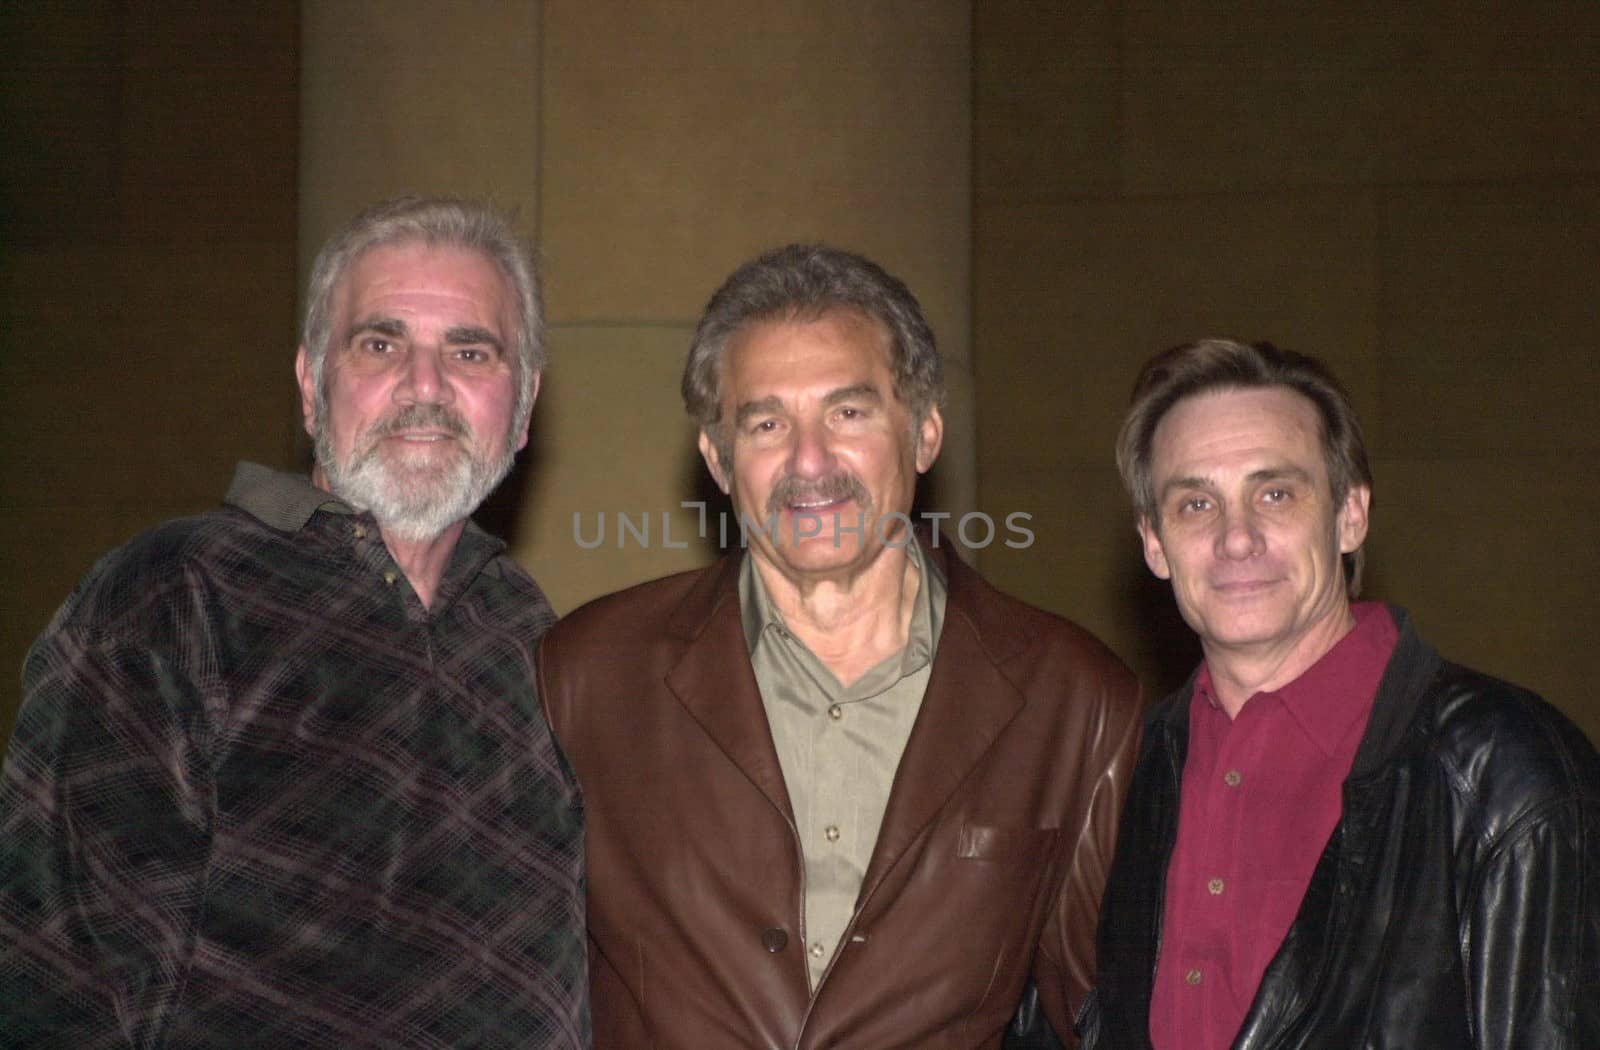 Alex Rocco, Richard Rush and Steve Railsback at the American Cinematheque's screening of "The Stunt Man" in Hollywood, 02-18-00